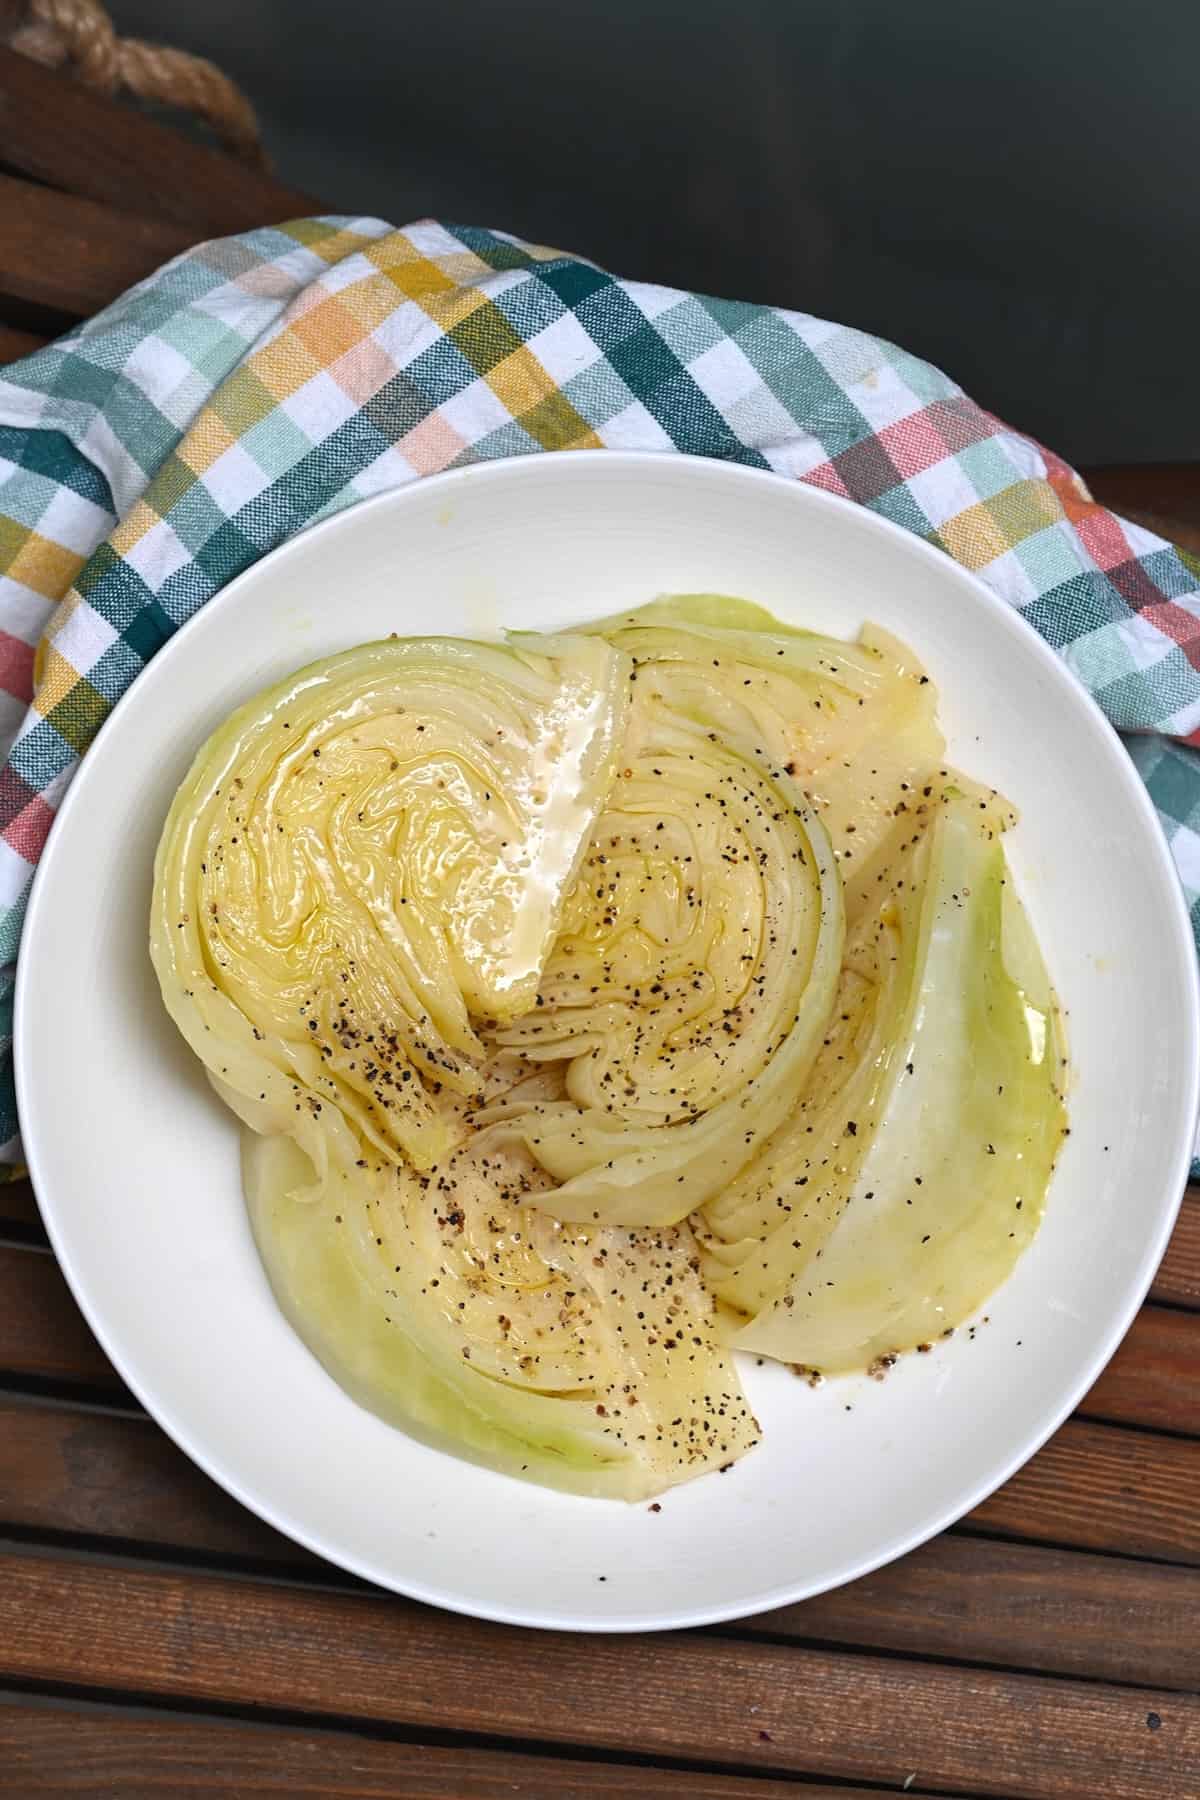 Boiled cabbage served on a plate